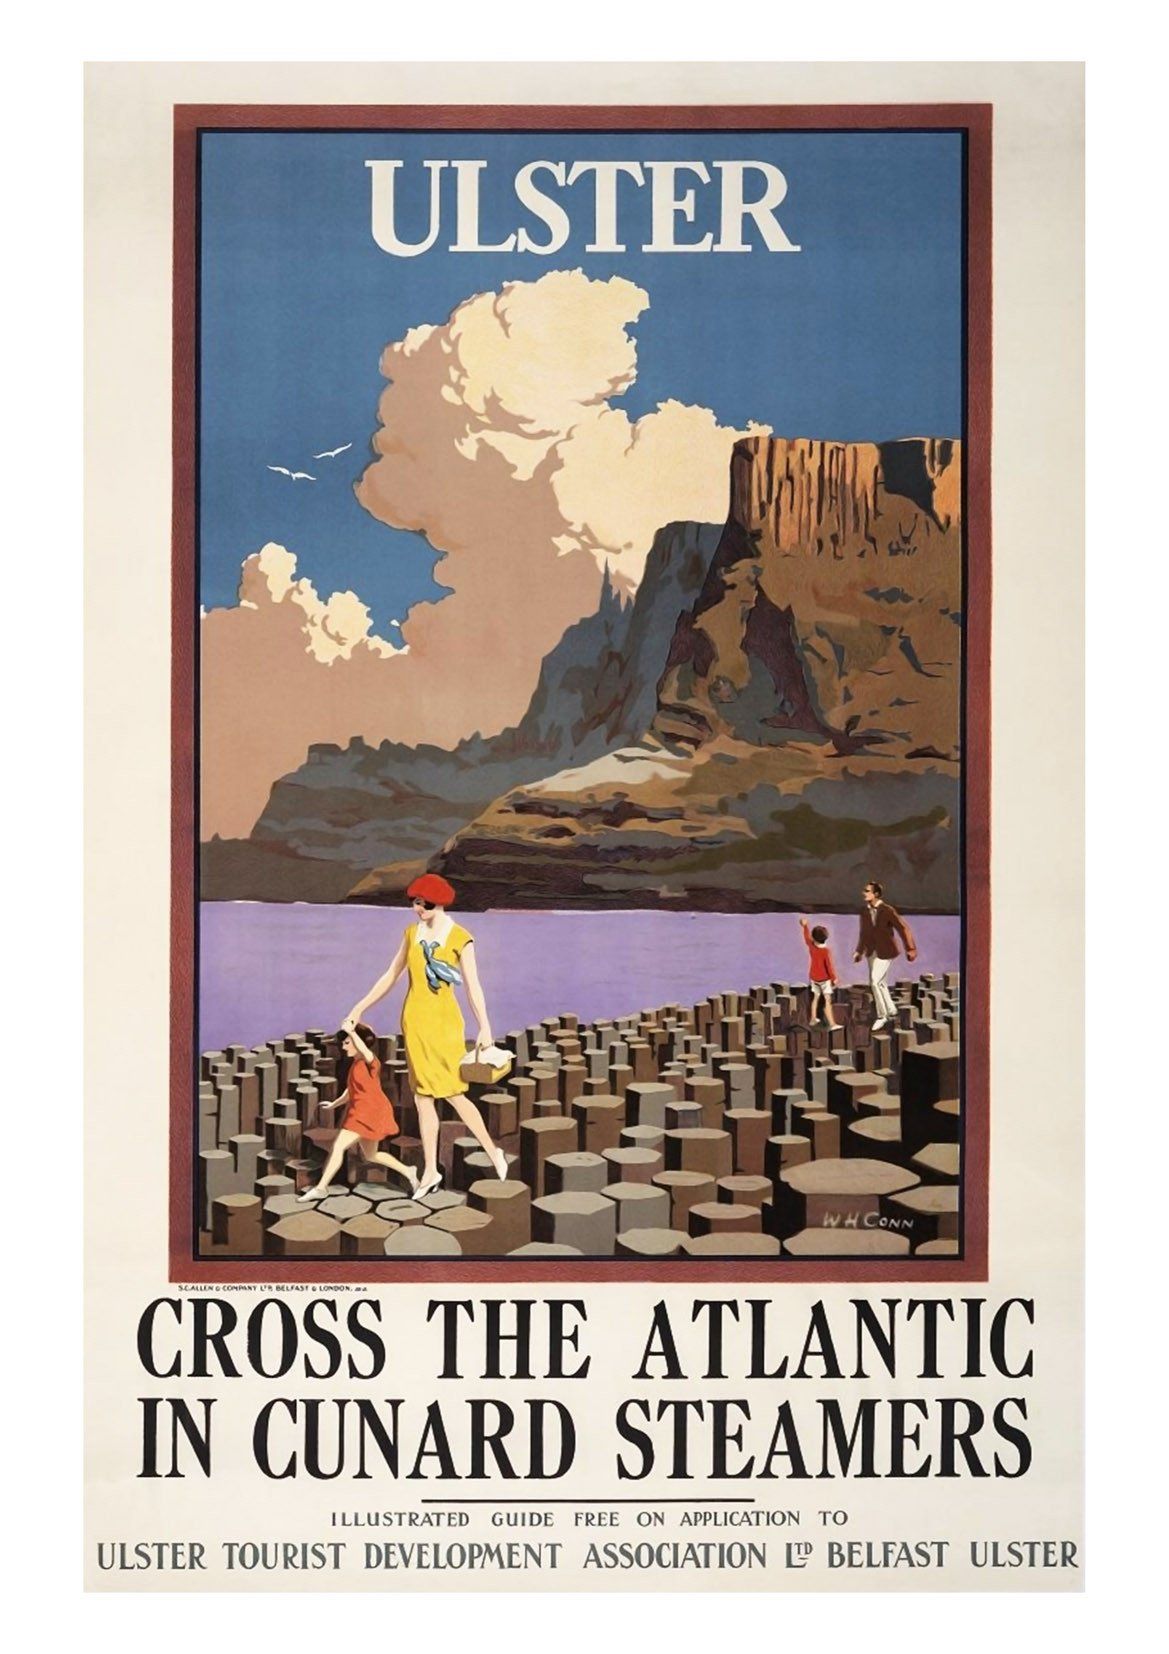 ULSTER POSTER: Vintage Tourism Advert Print - The Print Arcade